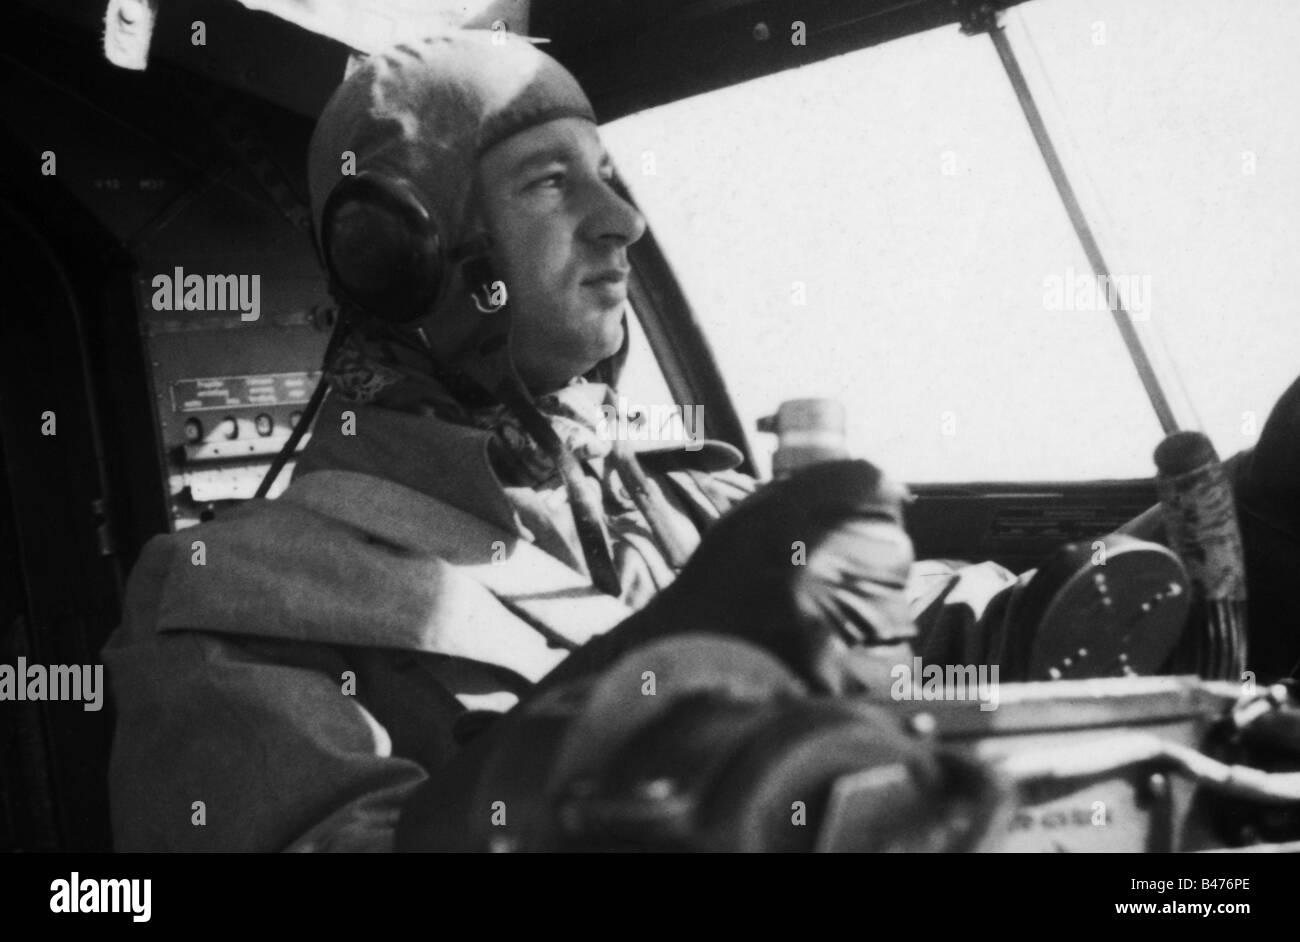 events, Second World War / WWII, aerial warfare, persons, Luftwaffe pilot in the cockpit of a bomber Heinkel 111 during a mission against Great Britain, August 1940, 20th century, historic, historical, Wehrmacht, Germany, Third Reich, soldier, soldiers, uniform, uniforms, flying cap, caps, suit, Battle of Britain, He111, He-111, steering stick, aviator, aviators, pilots, Hauptmann Lonicer, captain, people, 1940s, Stock Photo